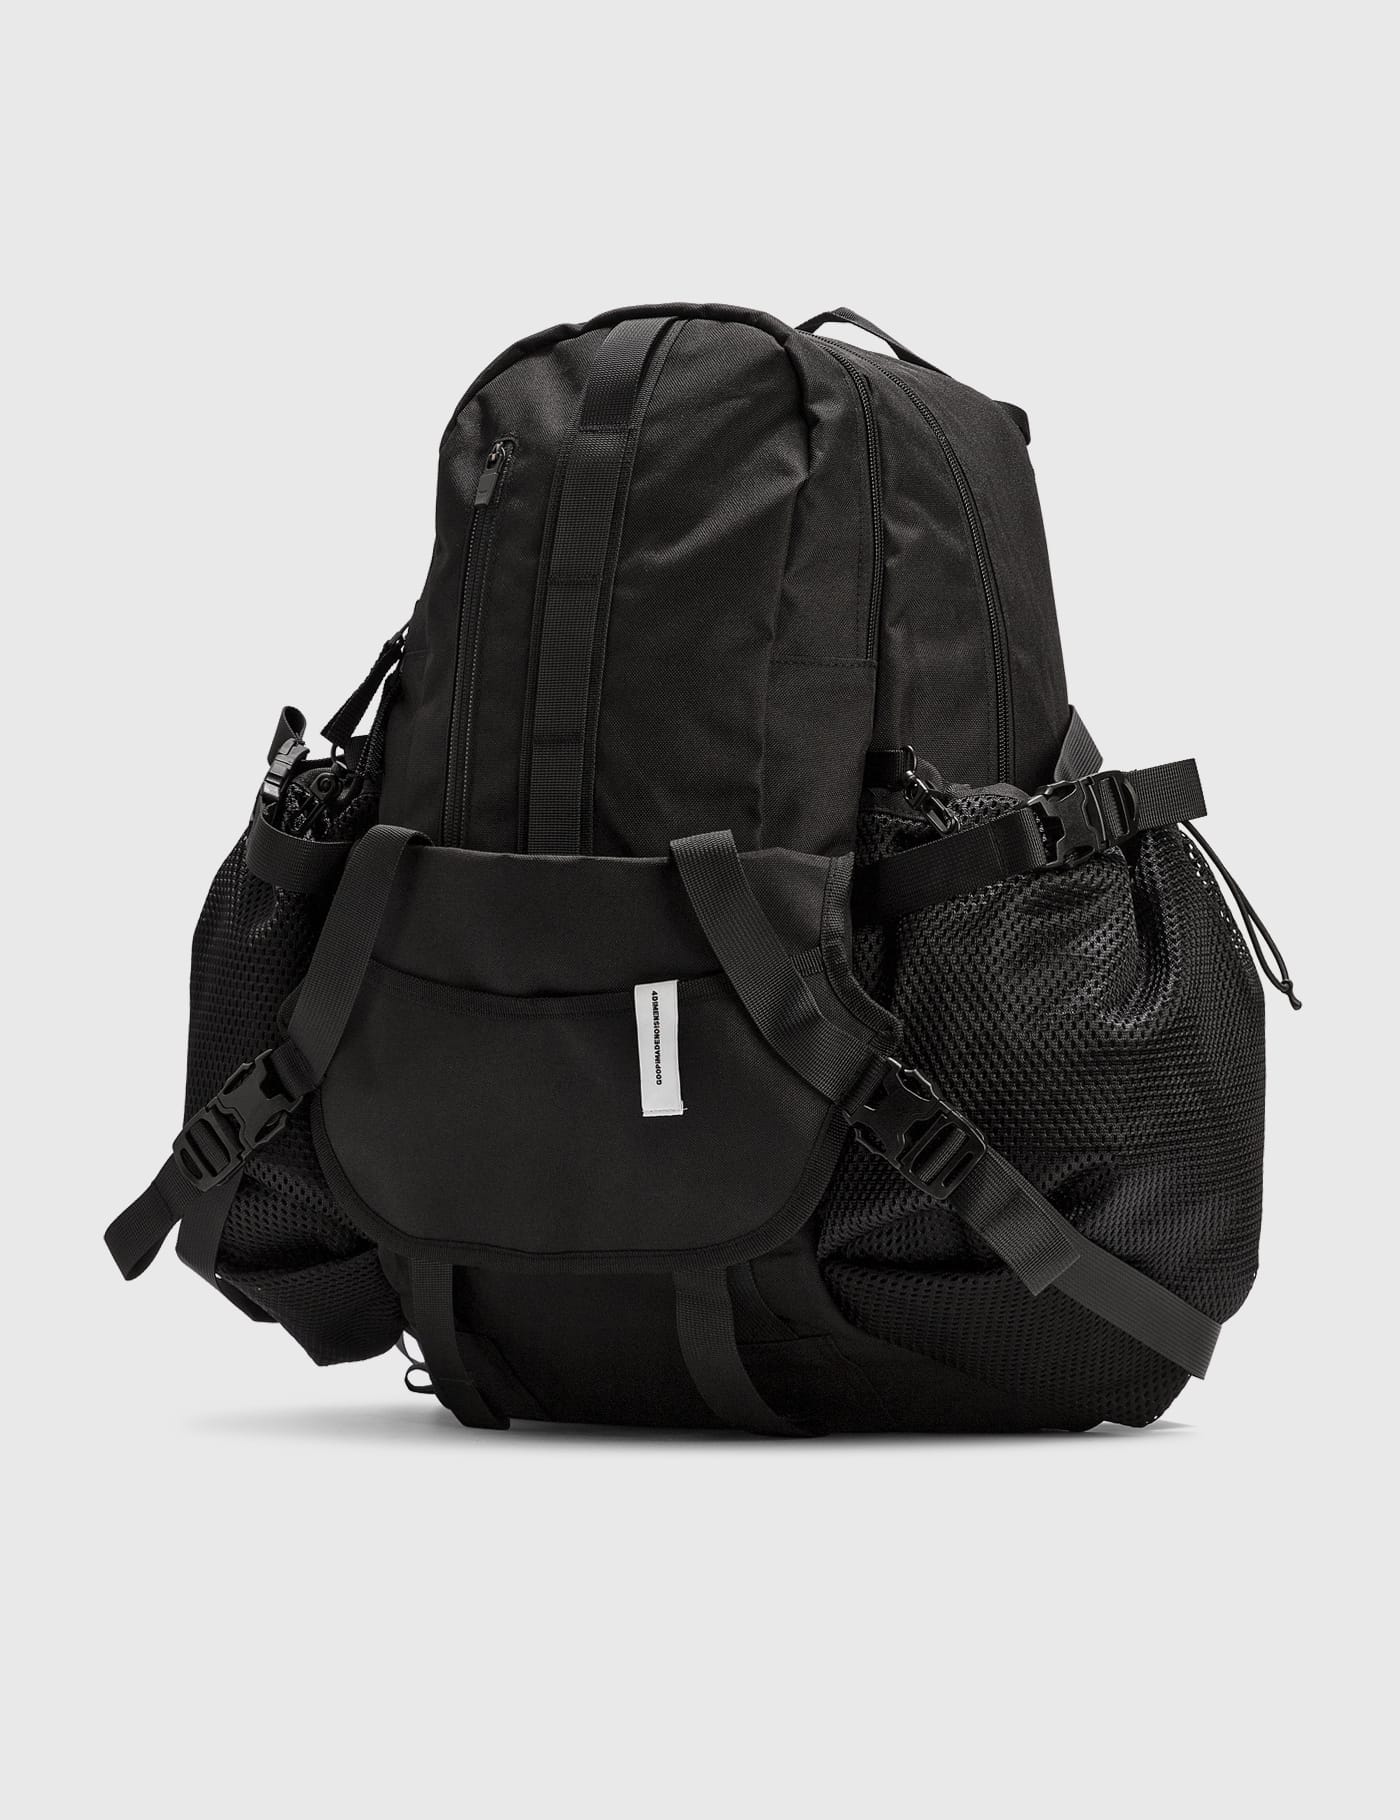 GOOPiMADE x 4Dimension Mountaineering Backpack